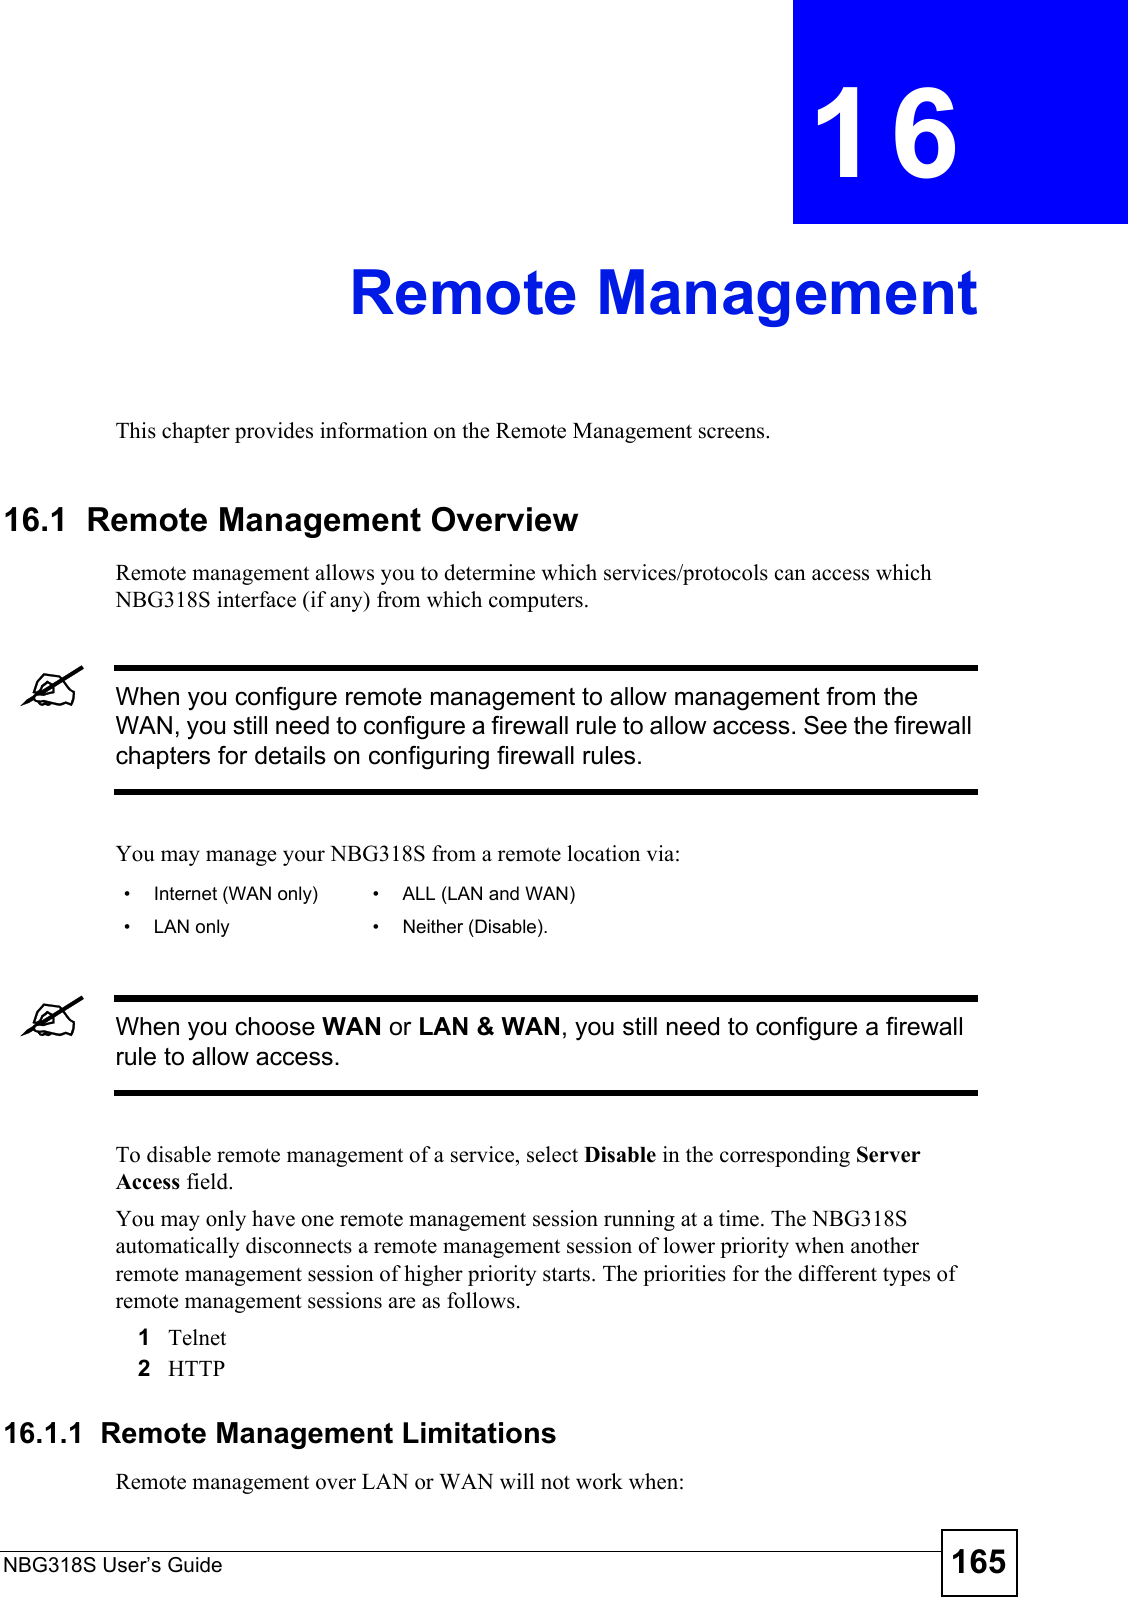 NBG318S User’s Guide 165CHAPTER  16 Remote ManagementThis chapter provides information on the Remote Management screens. 16.1  Remote Management OverviewRemote management allows you to determine which services/protocols can access which NBG318S interface (if any) from which computers.&quot;When you configure remote management to allow management from the WAN, you still need to configure a firewall rule to allow access. See the firewall chapters for details on configuring firewall rules.You may manage your NBG318S from a remote location via:&quot;When you choose WAN or LAN &amp; WAN, you still need to configure a firewall rule to allow access.To disable remote management of a service, select Disable in the corresponding Server Access field.You may only have one remote management session running at a time. The NBG318S automatically disconnects a remote management session of lower priority when another remote management session of higher priority starts. The priorities for the different types of remote management sessions are as follows.1Telnet2HTTP16.1.1  Remote Management LimitationsRemote management over LAN or WAN will not work when:• Internet (WAN only) • ALL (LAN and WAN)• LAN only • Neither (Disable).